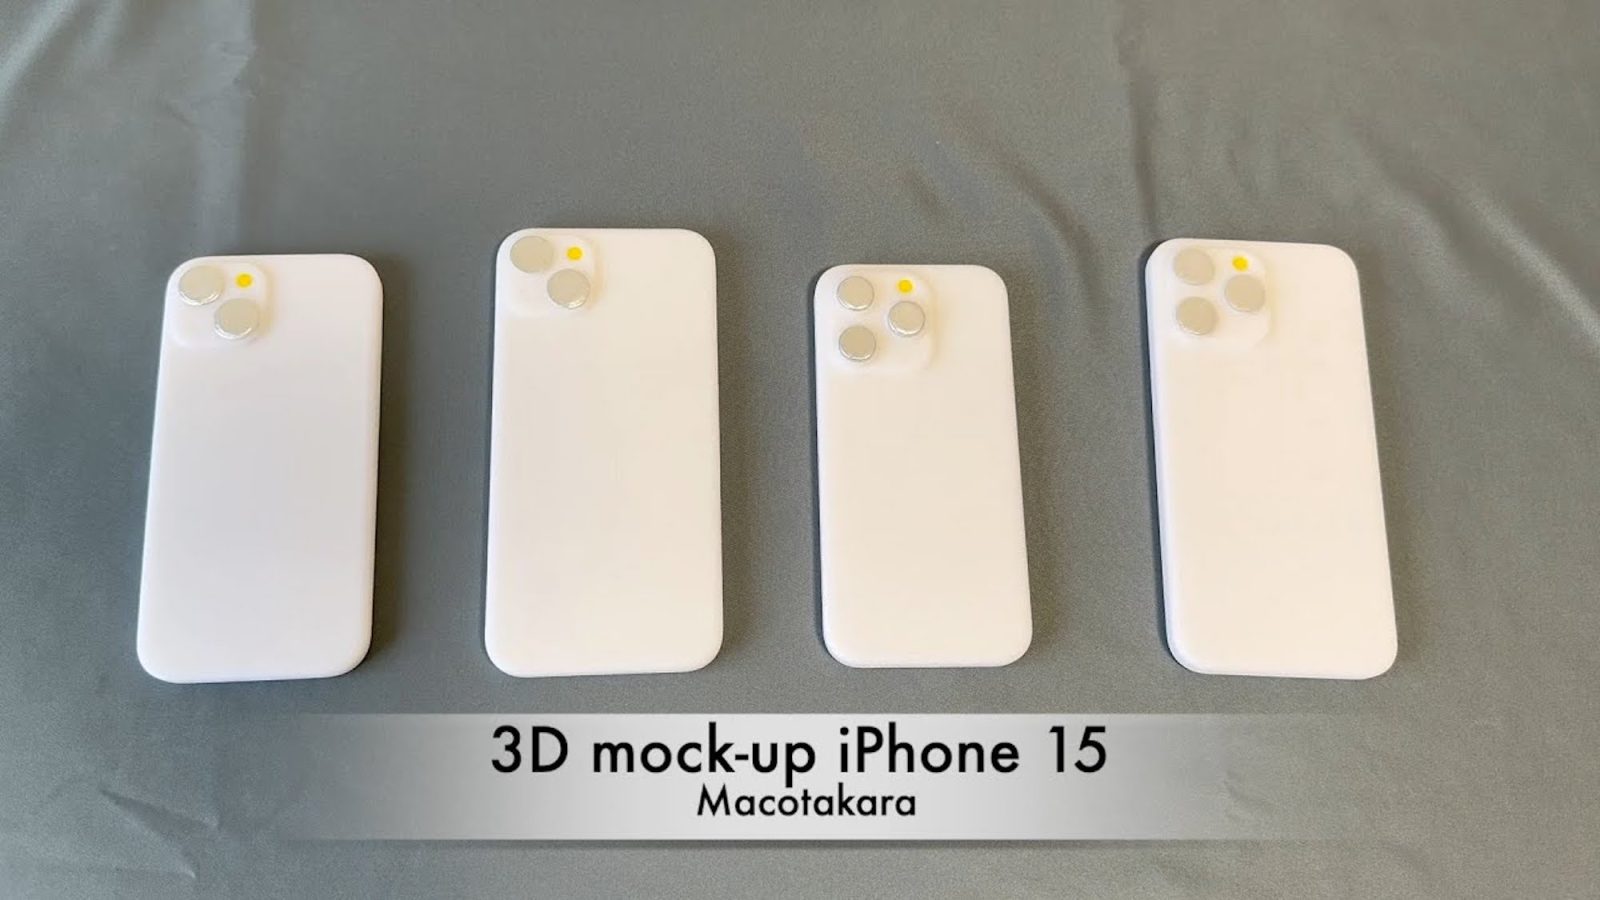 Video shows off 3D-printed iPhone 15 dummy units and tests compatibility with iPhone 14 cases